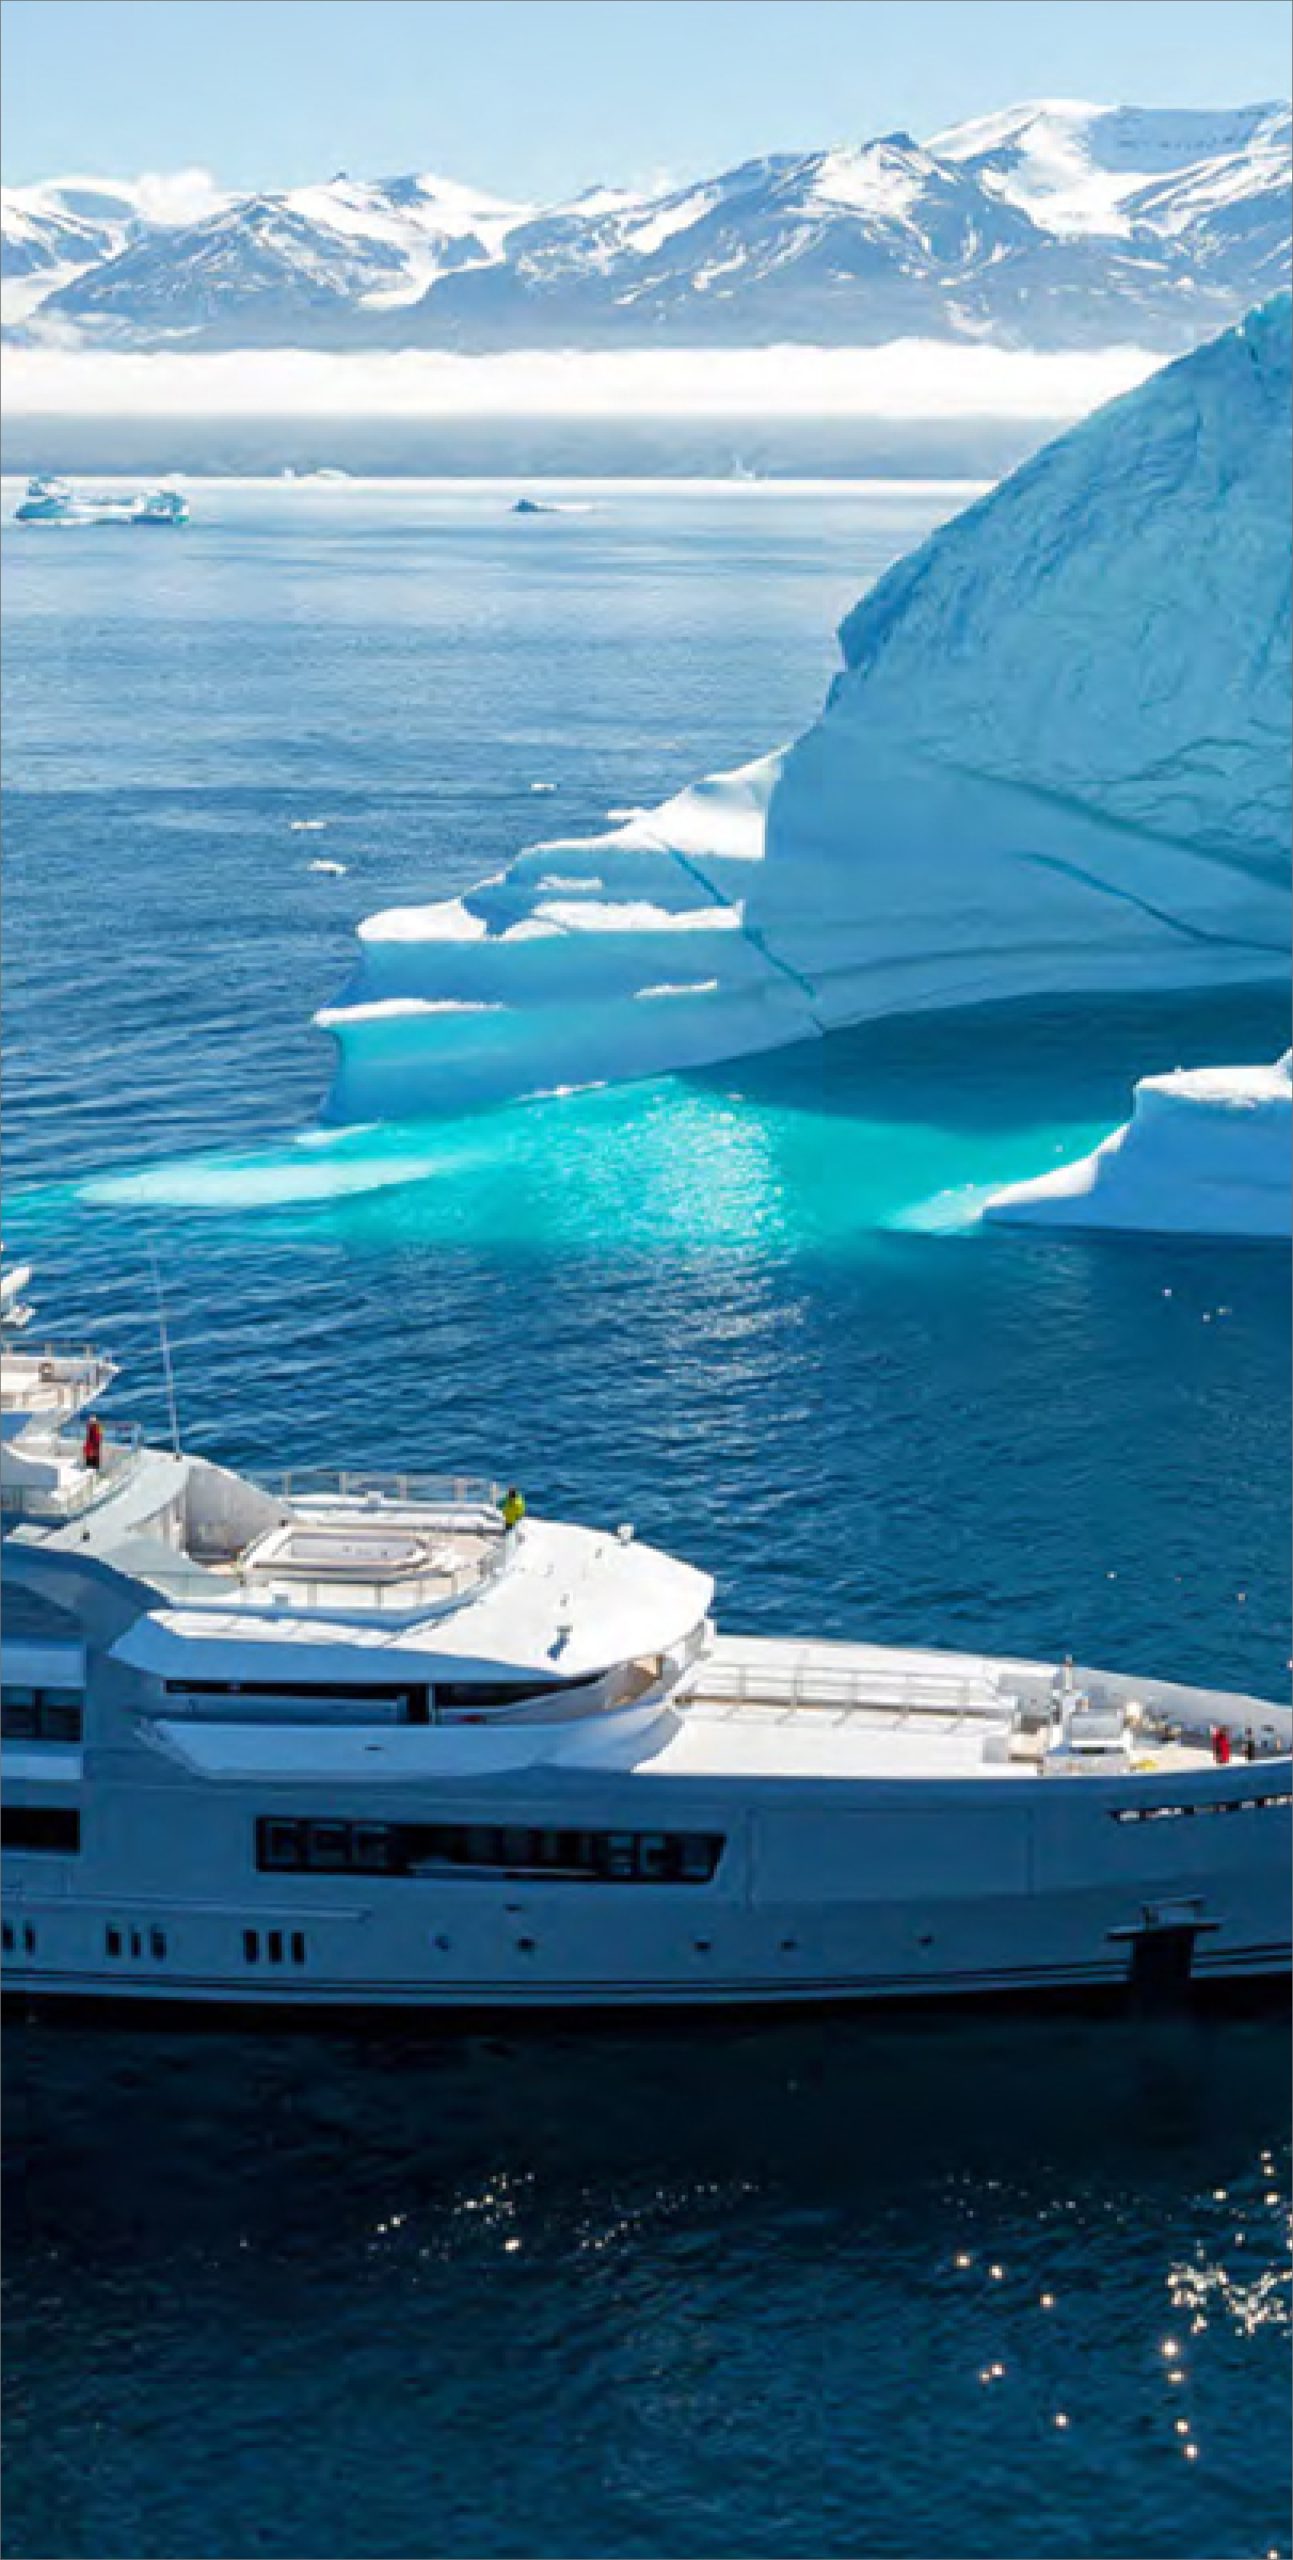 4-Main-Page-Yacht-Private-Journey-Arctic-Polar-Adventure-Arctic-Kingdom-scaled